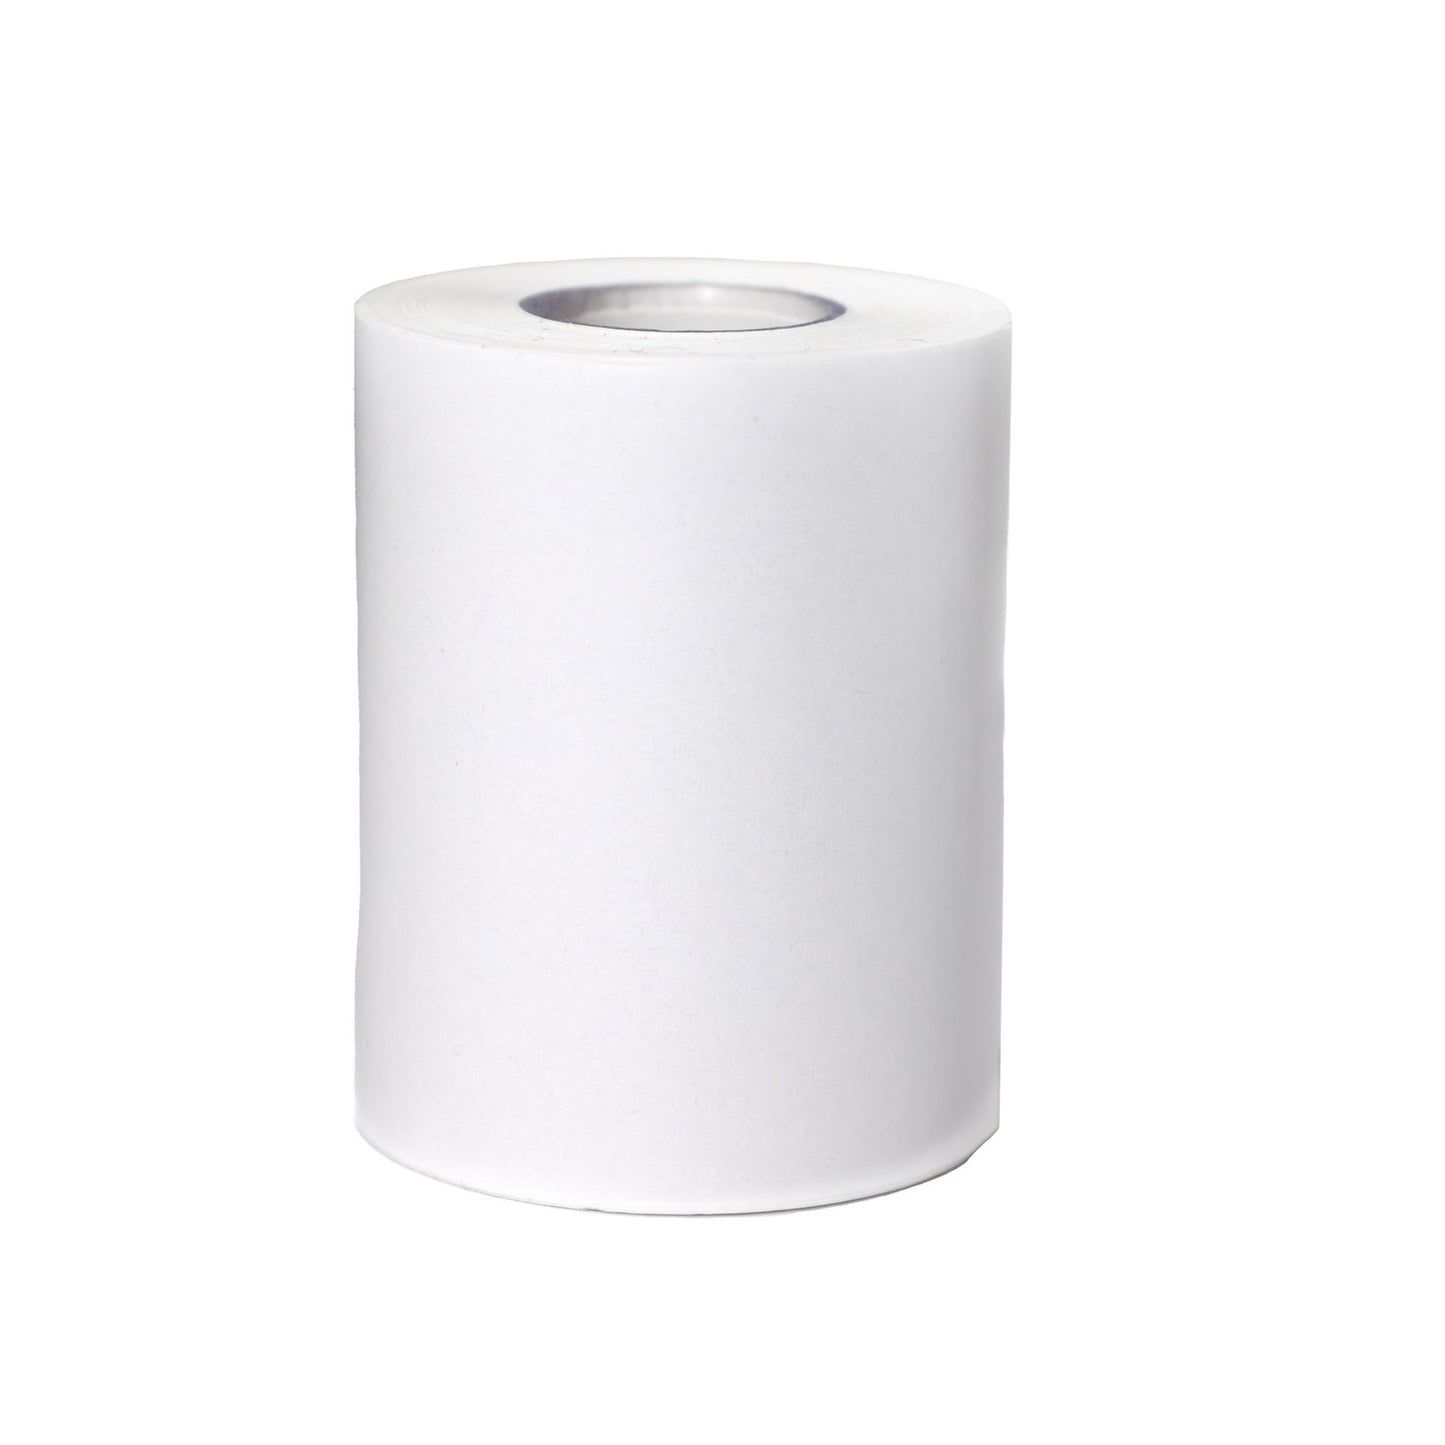 Thermal Paper For M8500 Monitors From Biolight